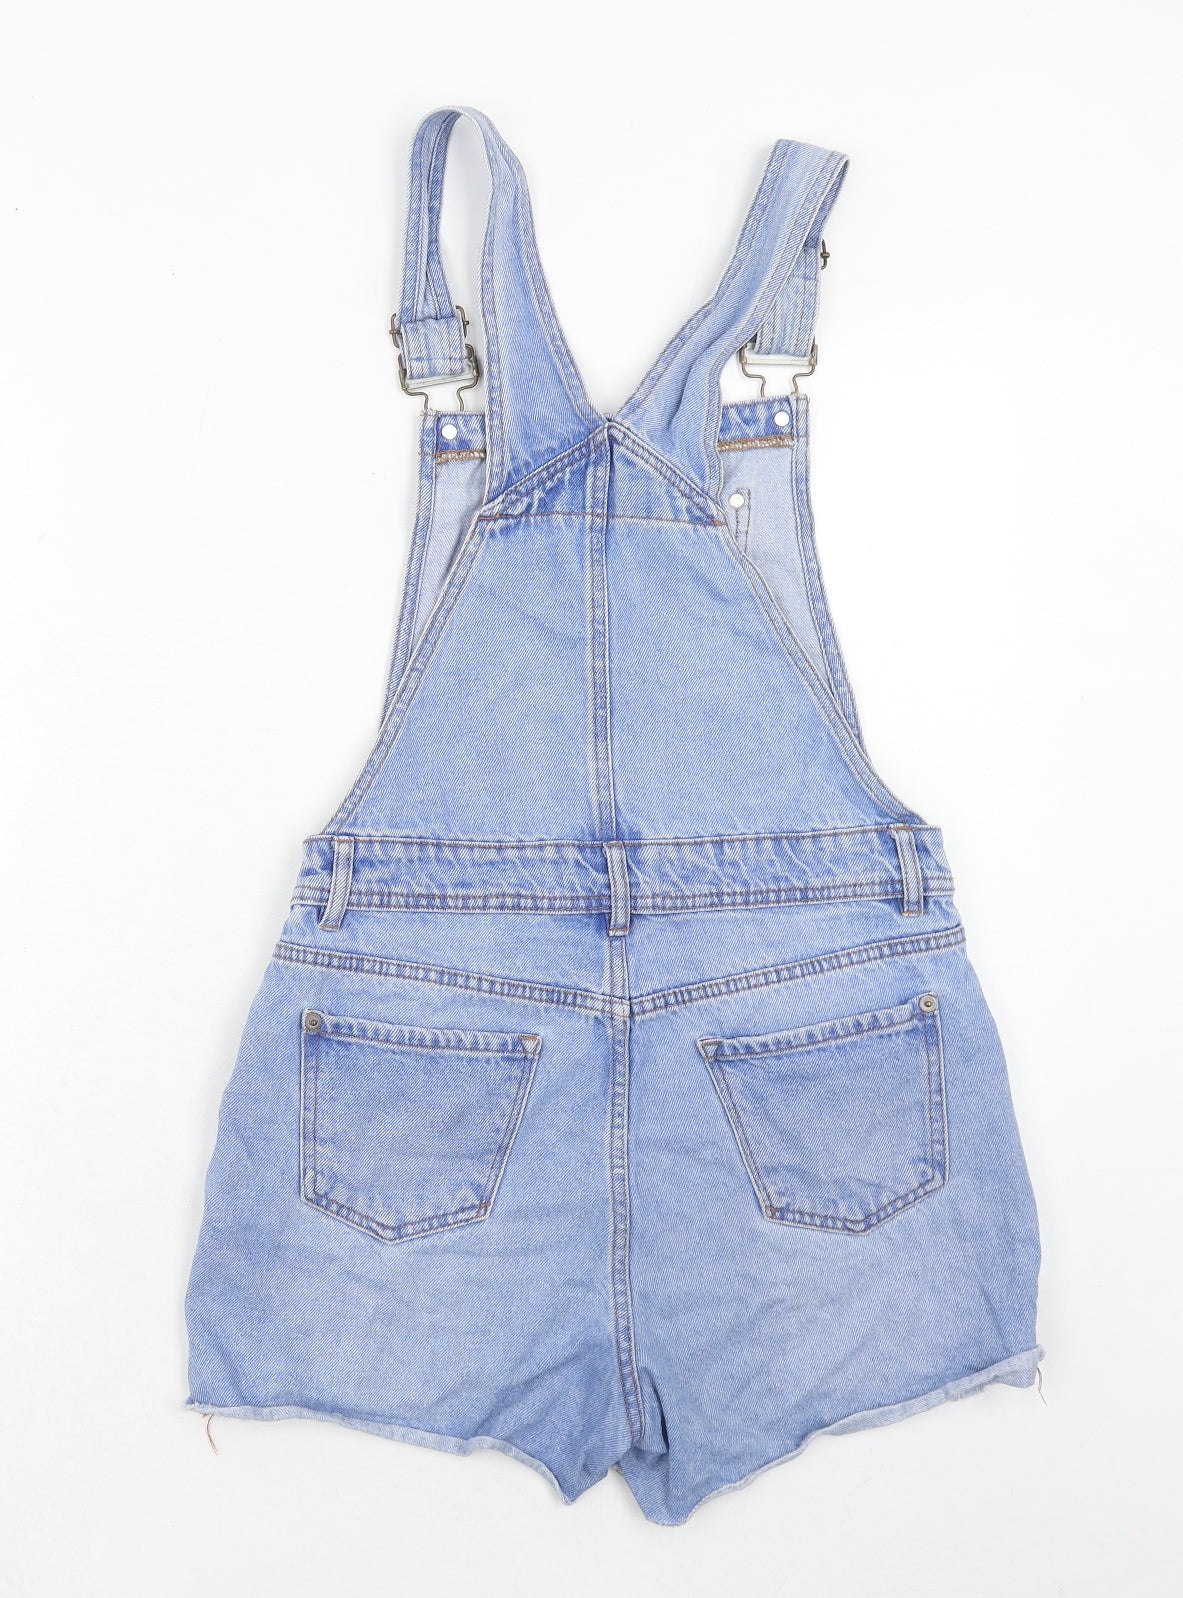 New Look Girls Blue Cotton Dungaree One-Piece Size 13 Years Button - Distressed